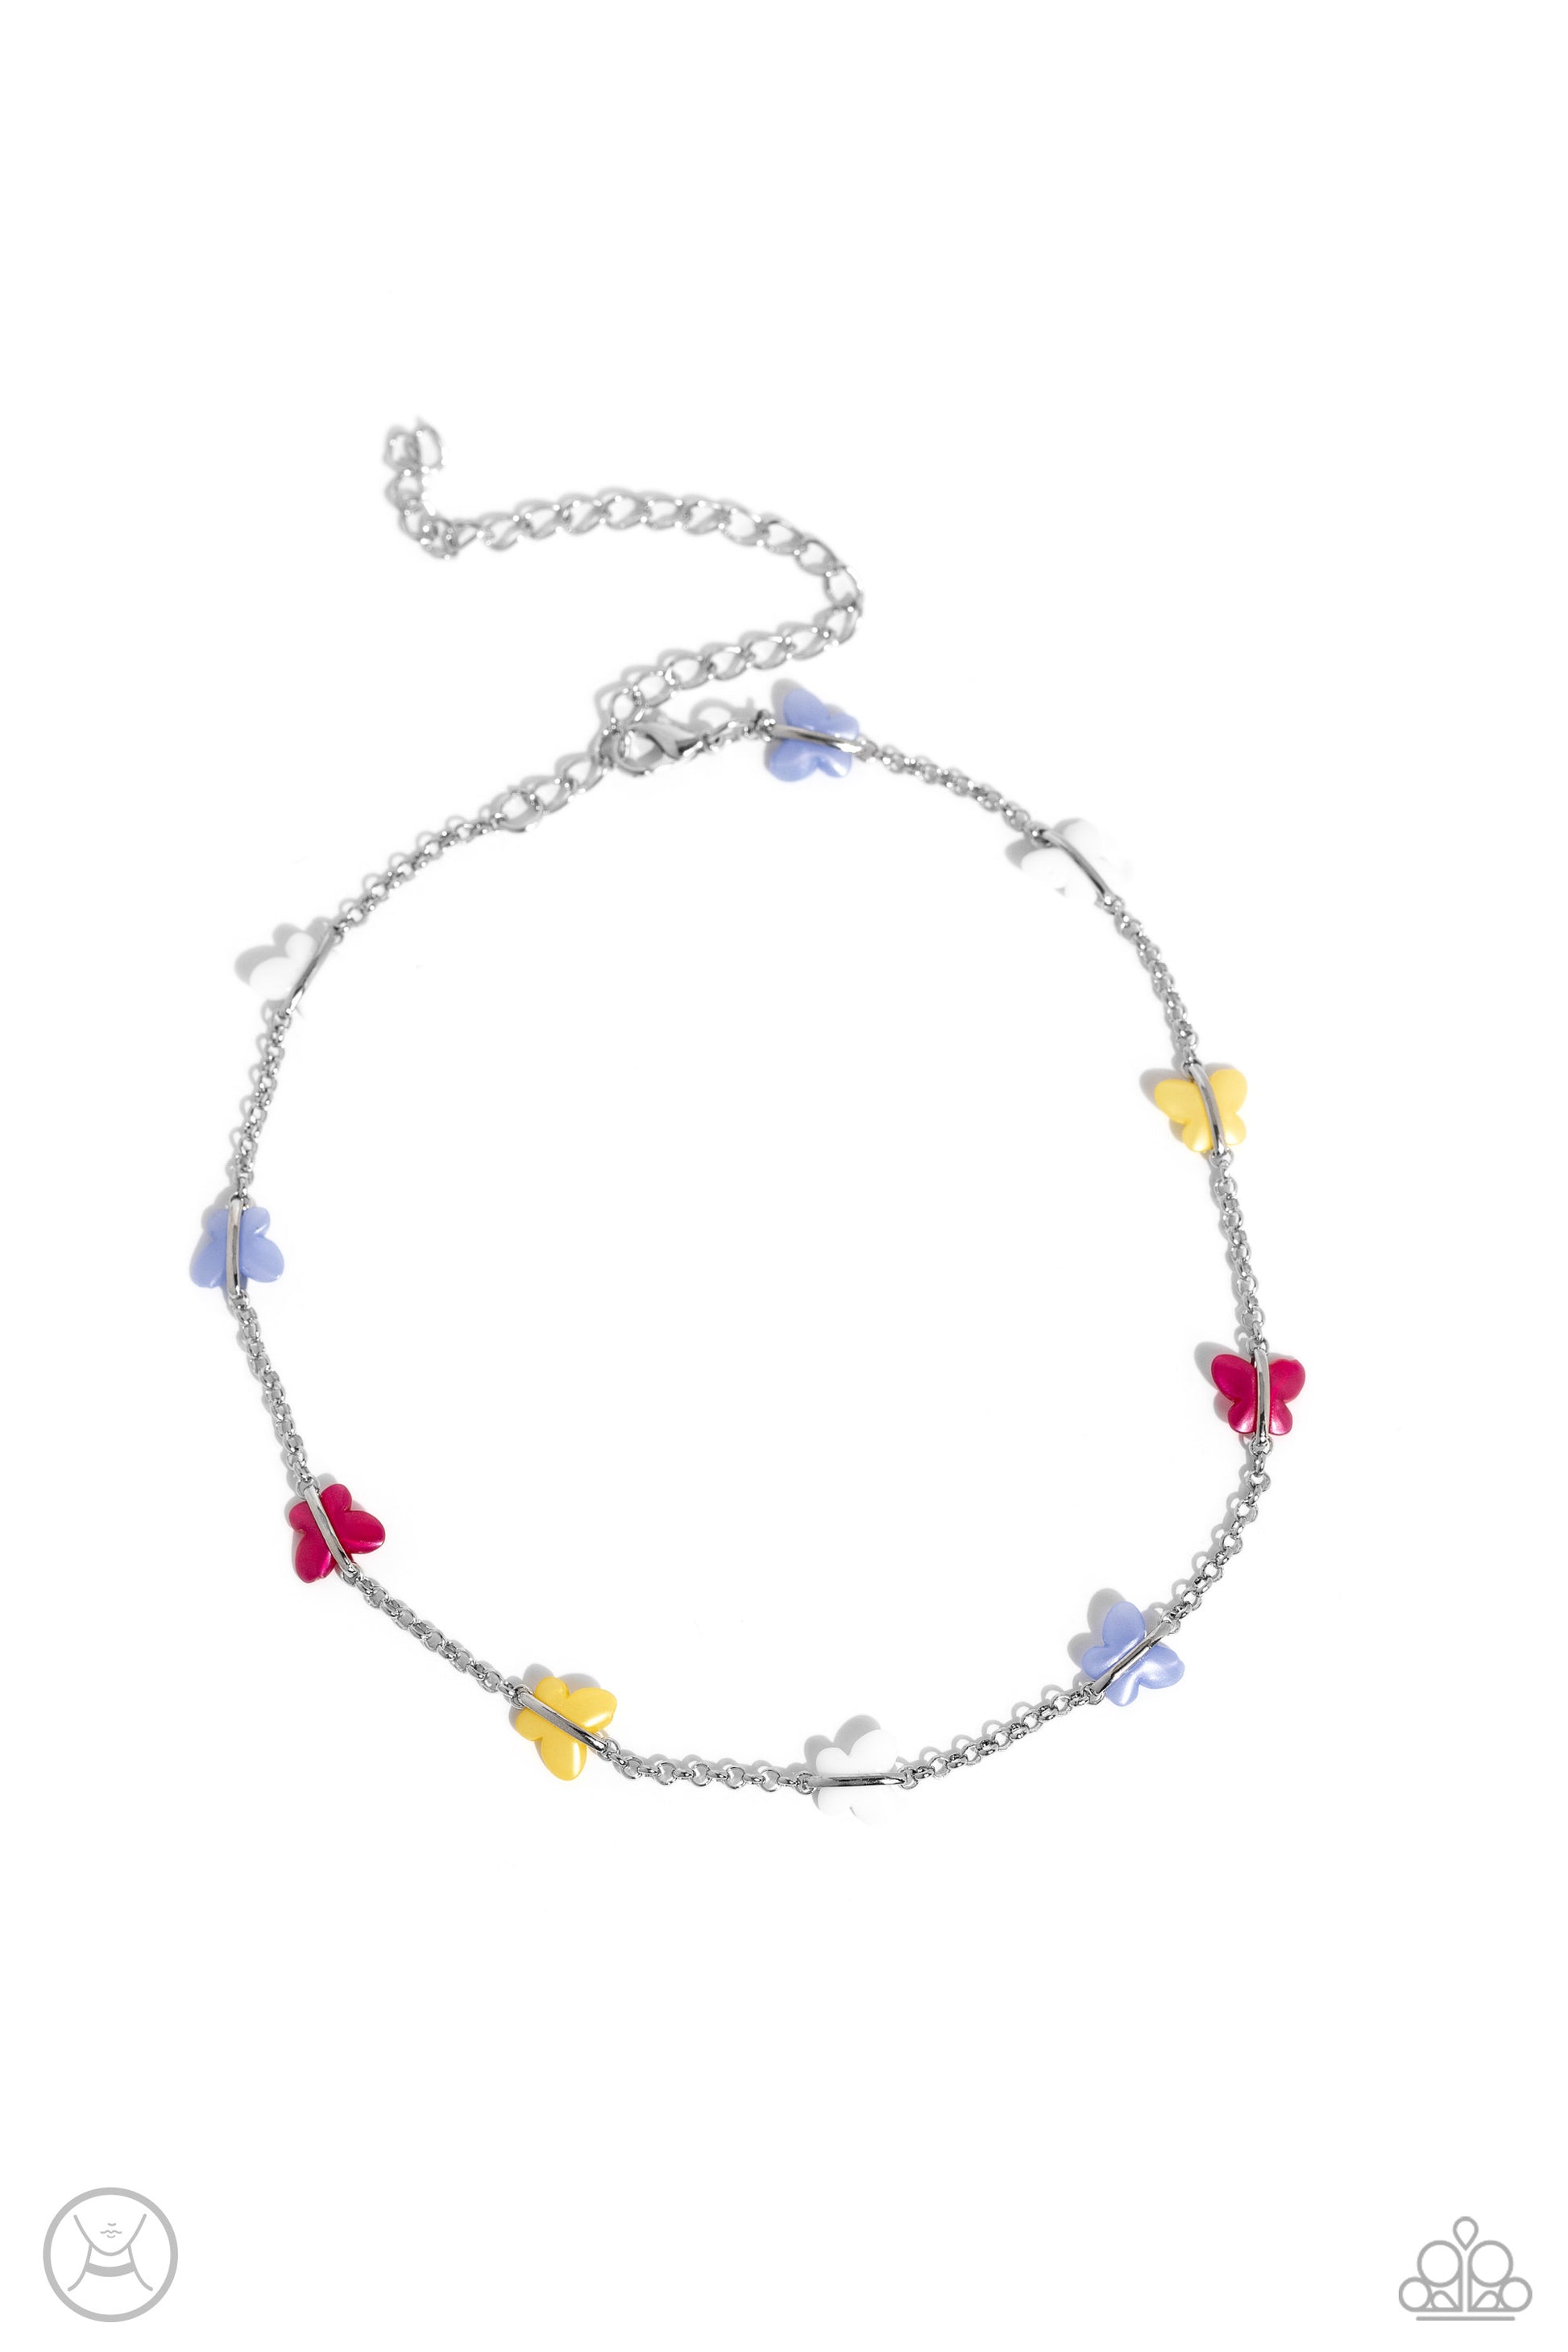 Infused along a row of dainty silver chain, a collection of blue, white, Primrose, and pink butterflies coalesces around the neckline for a whimsical finish. Features an adjustable clasp closure.  Sold as one individual choker necklace. Includes one pair of matching earrings.   Choker